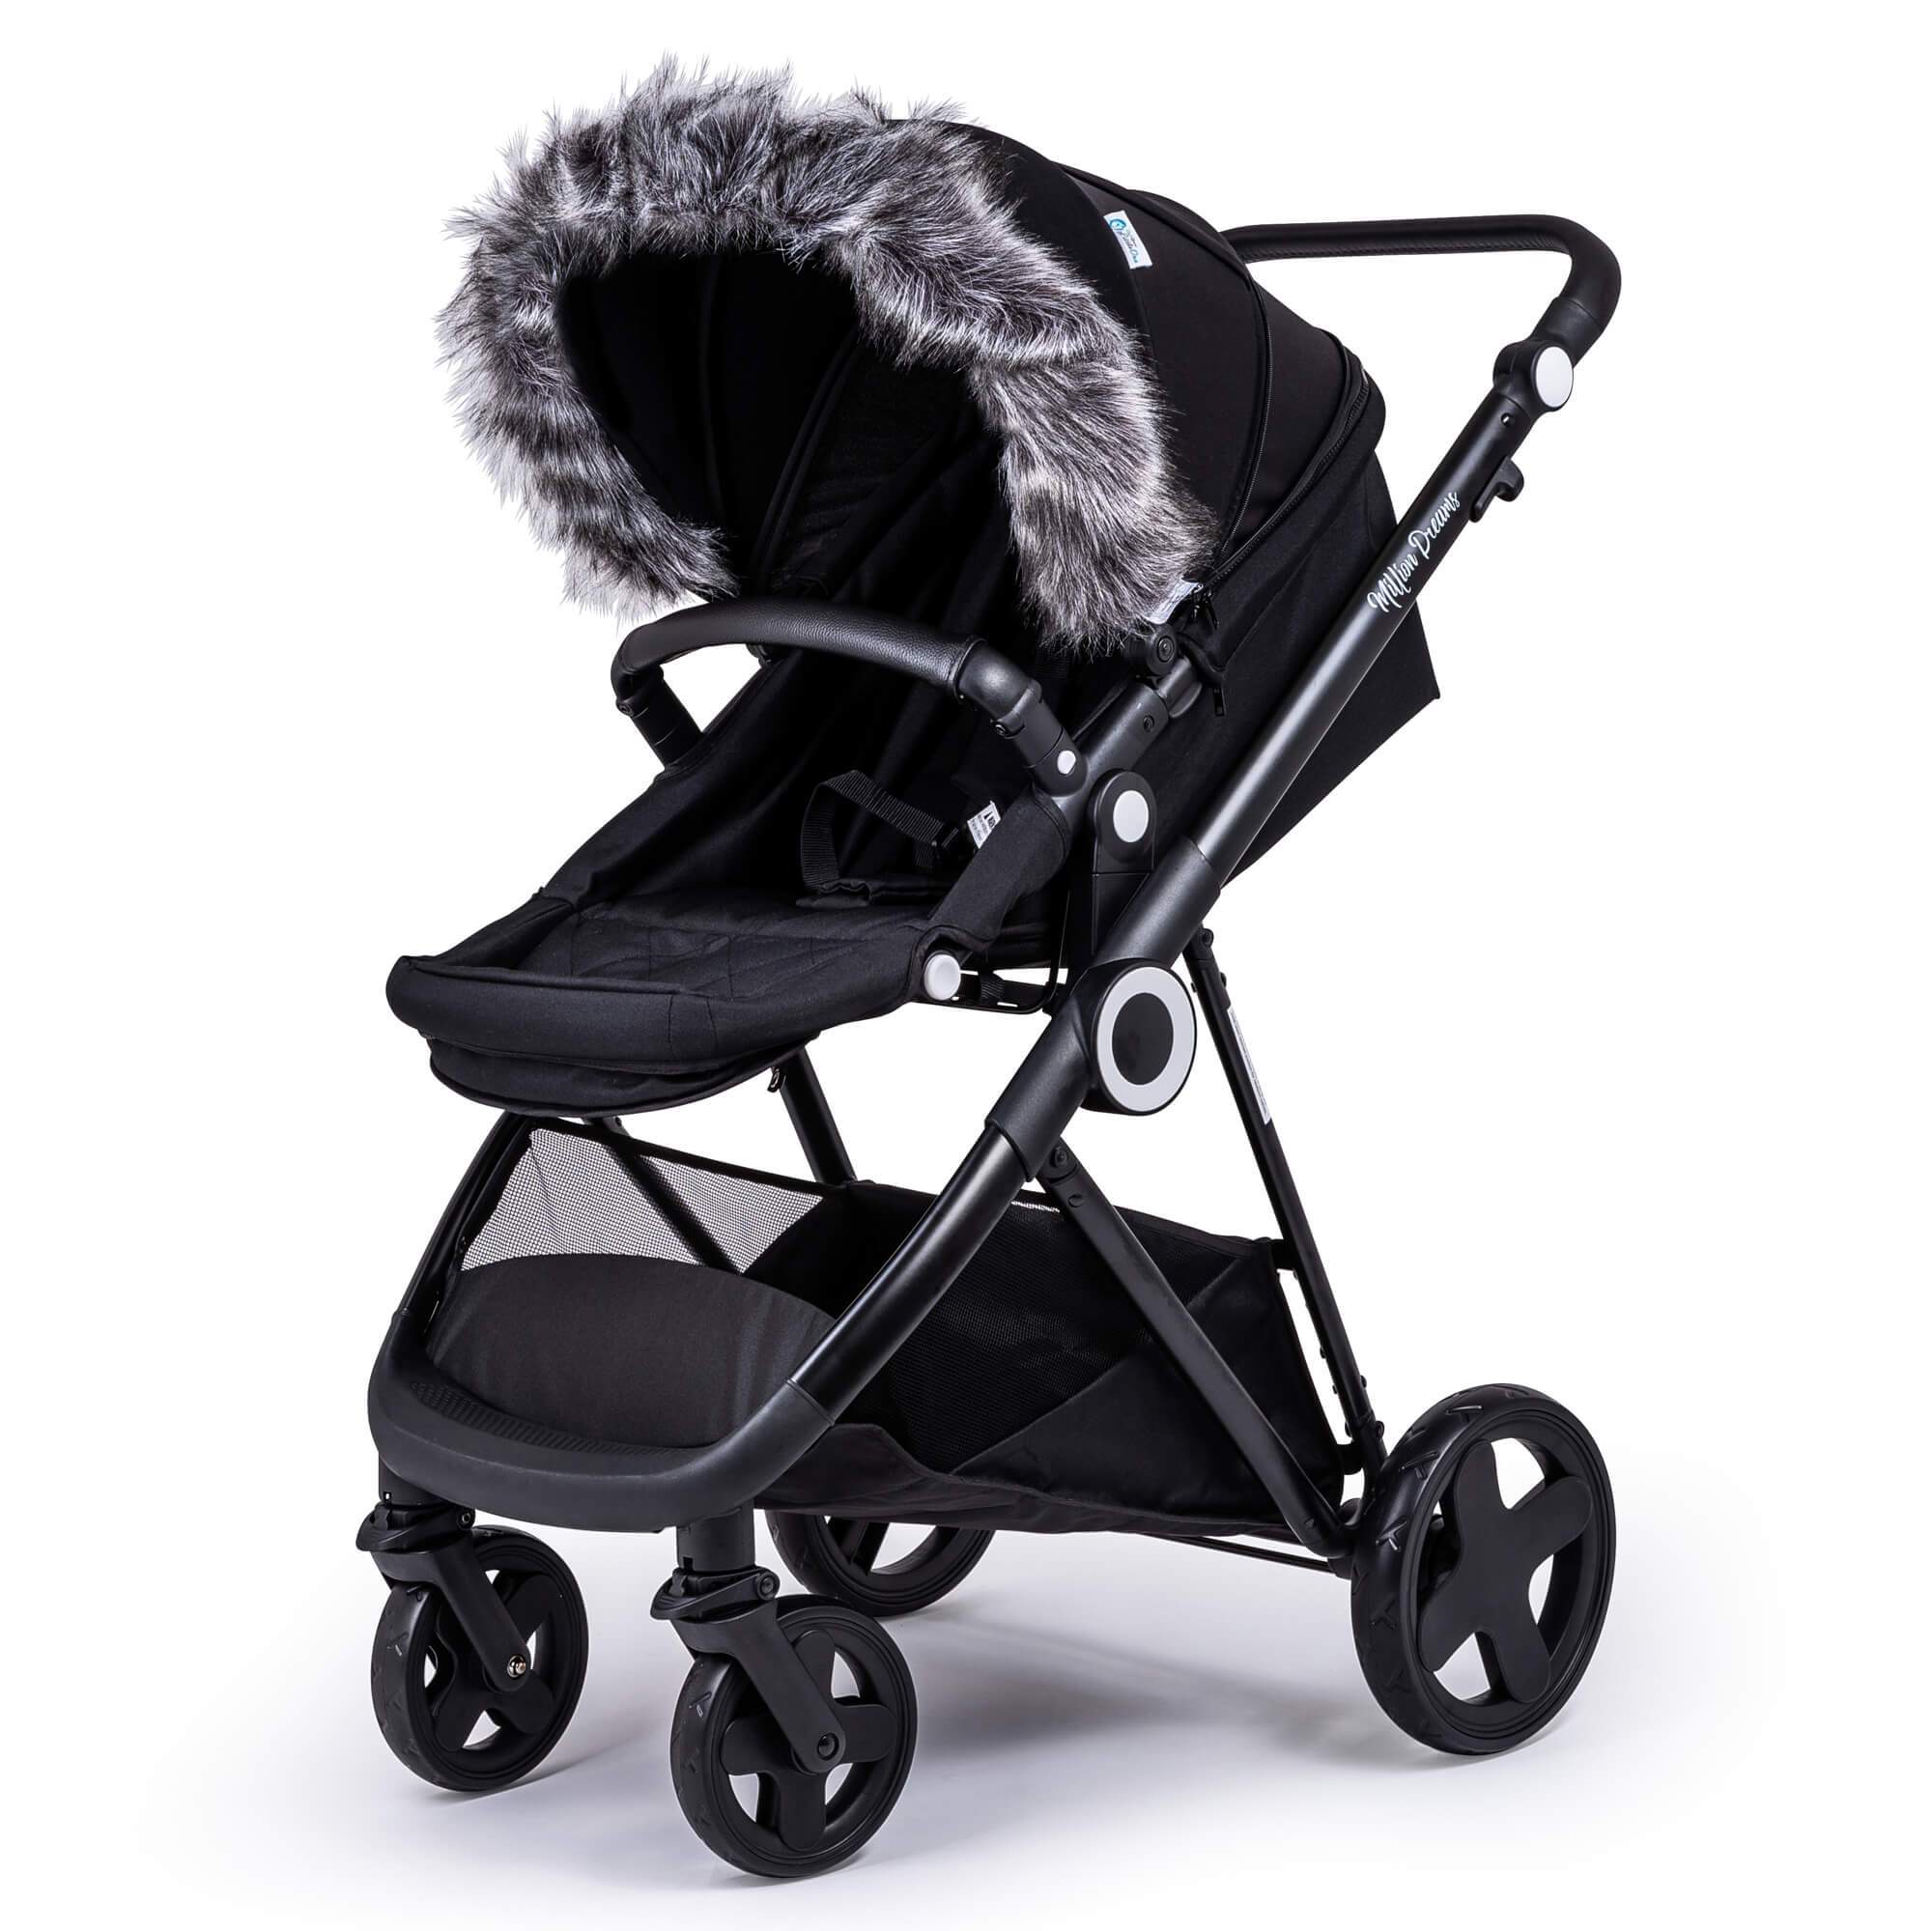 Pram Fur Hood Trim Attachment for Pushchair Compatible with Recaro - Dark Grey / Fits All Models | For Your Little One